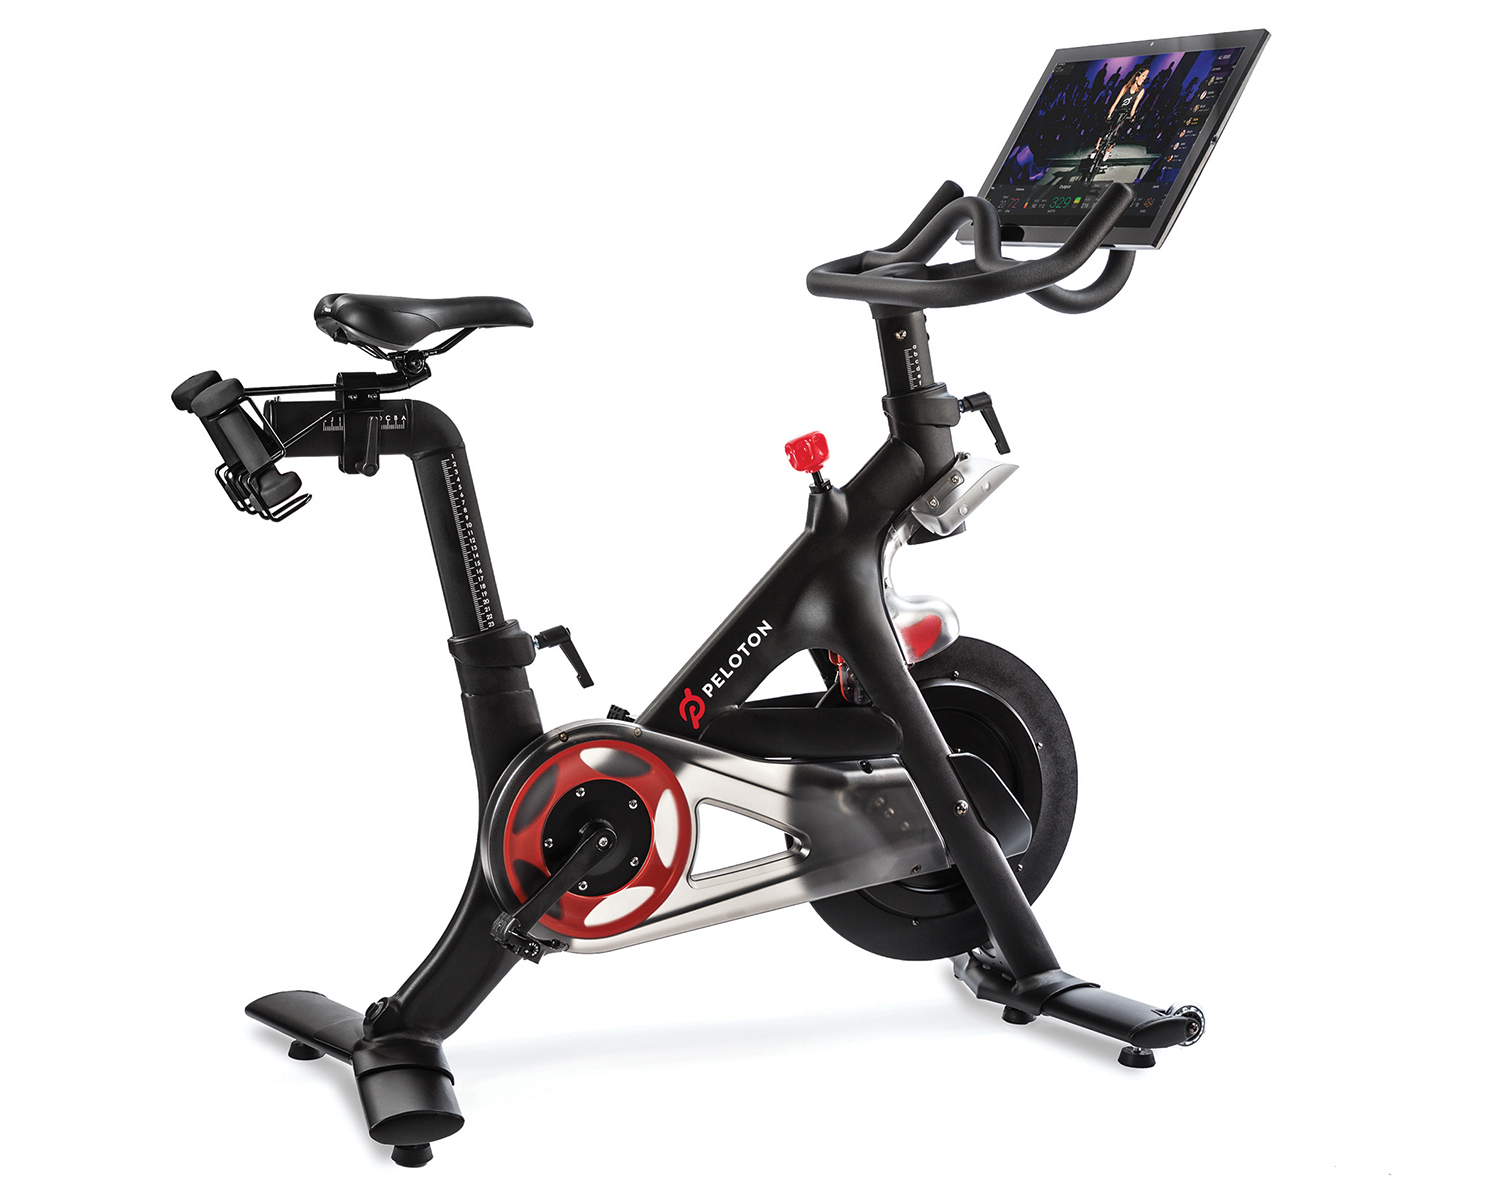 The world of Peloton: Starting with interactive bikes, the company has expanded its subscription offerings to treadmills and personal workout apps.